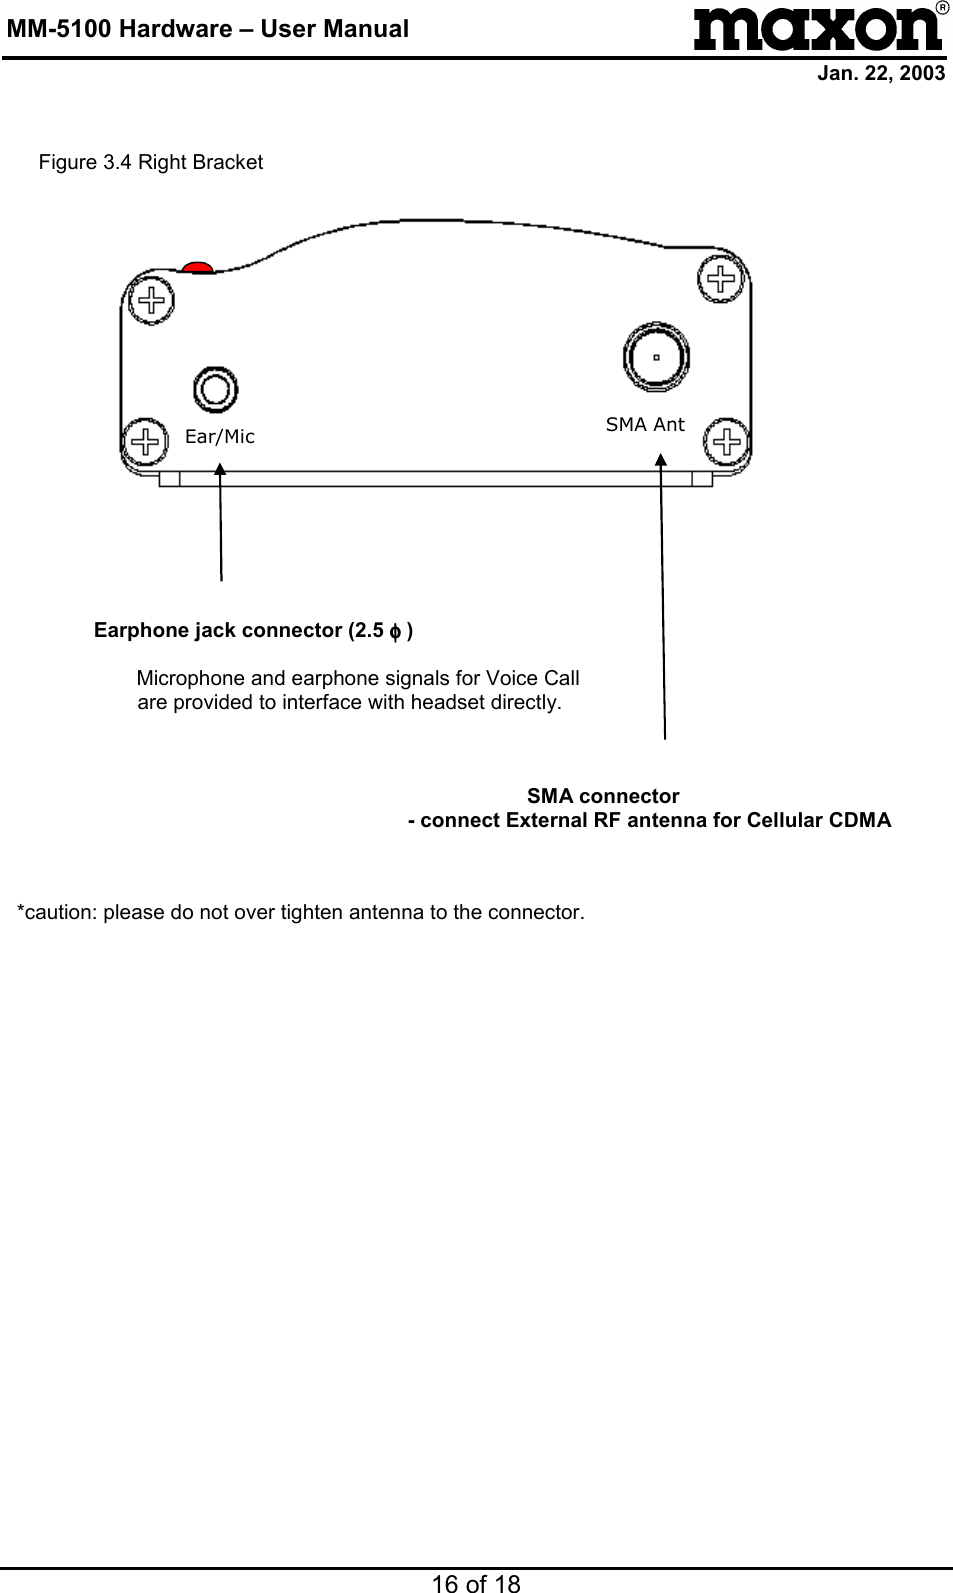 MM-5100 Hardware – User Manual Jan. 22, 2003 16 of 18                                  Ear/Mic SMA Ant      Earphone jack connector (2.5 φφφφ )    Microphone and earphone signals for Voice Call are provided to interface with headset directly.      SMA connector   - connect External RF antenna for Cellular CDMA      *caution: please do not over tighten antenna to the connector.   Figure 3.4 Right Bracket 